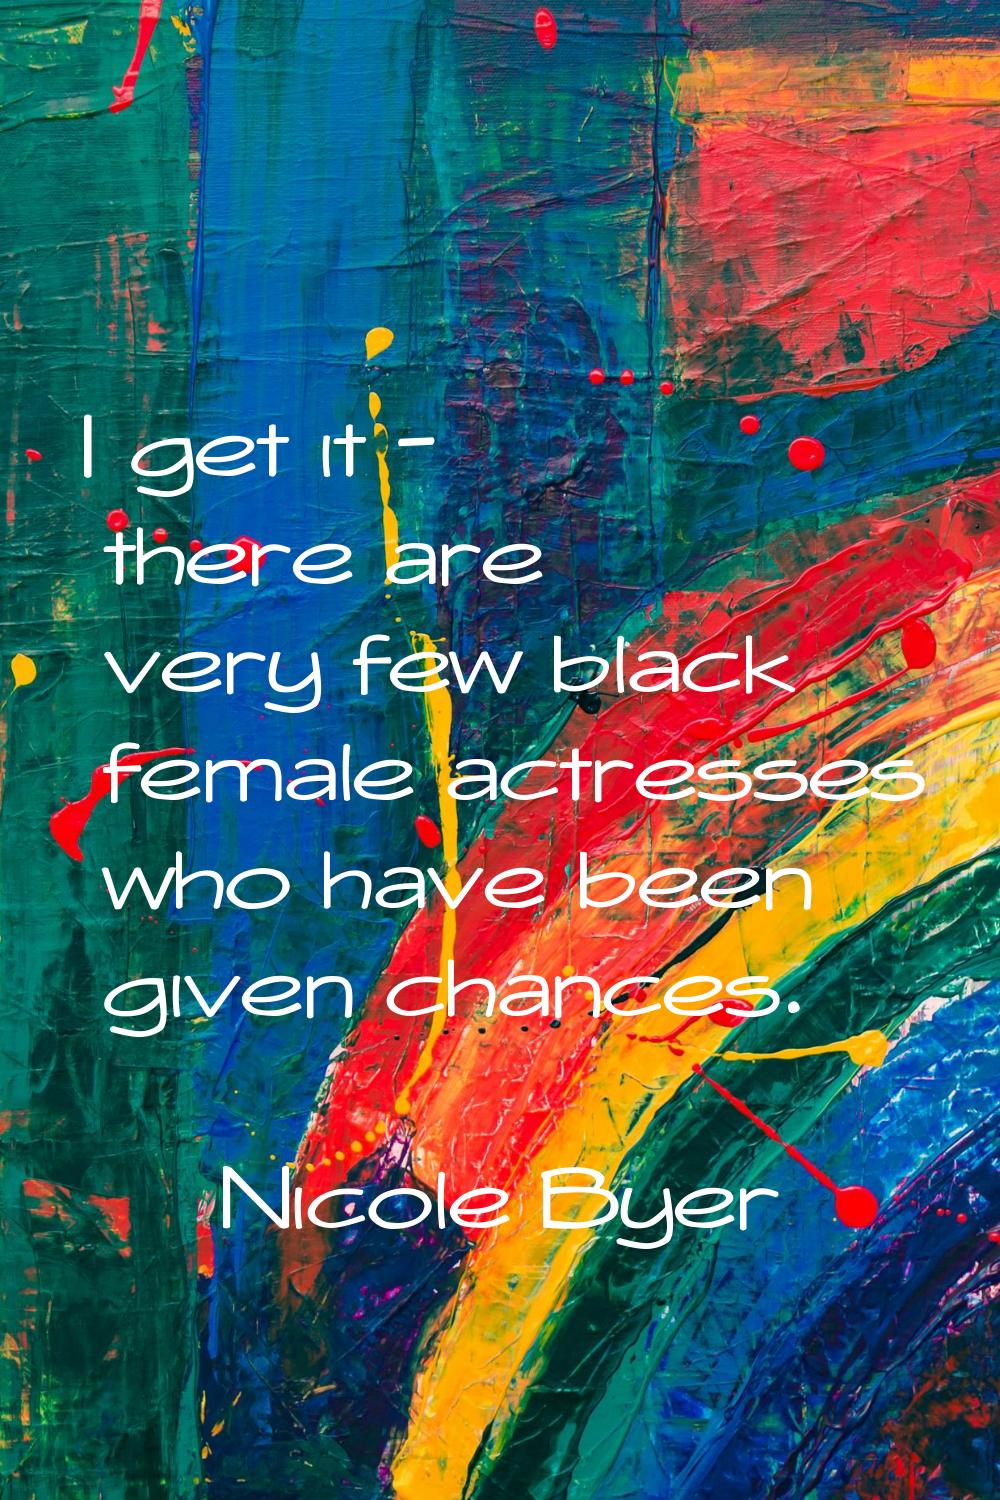 I get it - there are very few black female actresses who have been given chances.